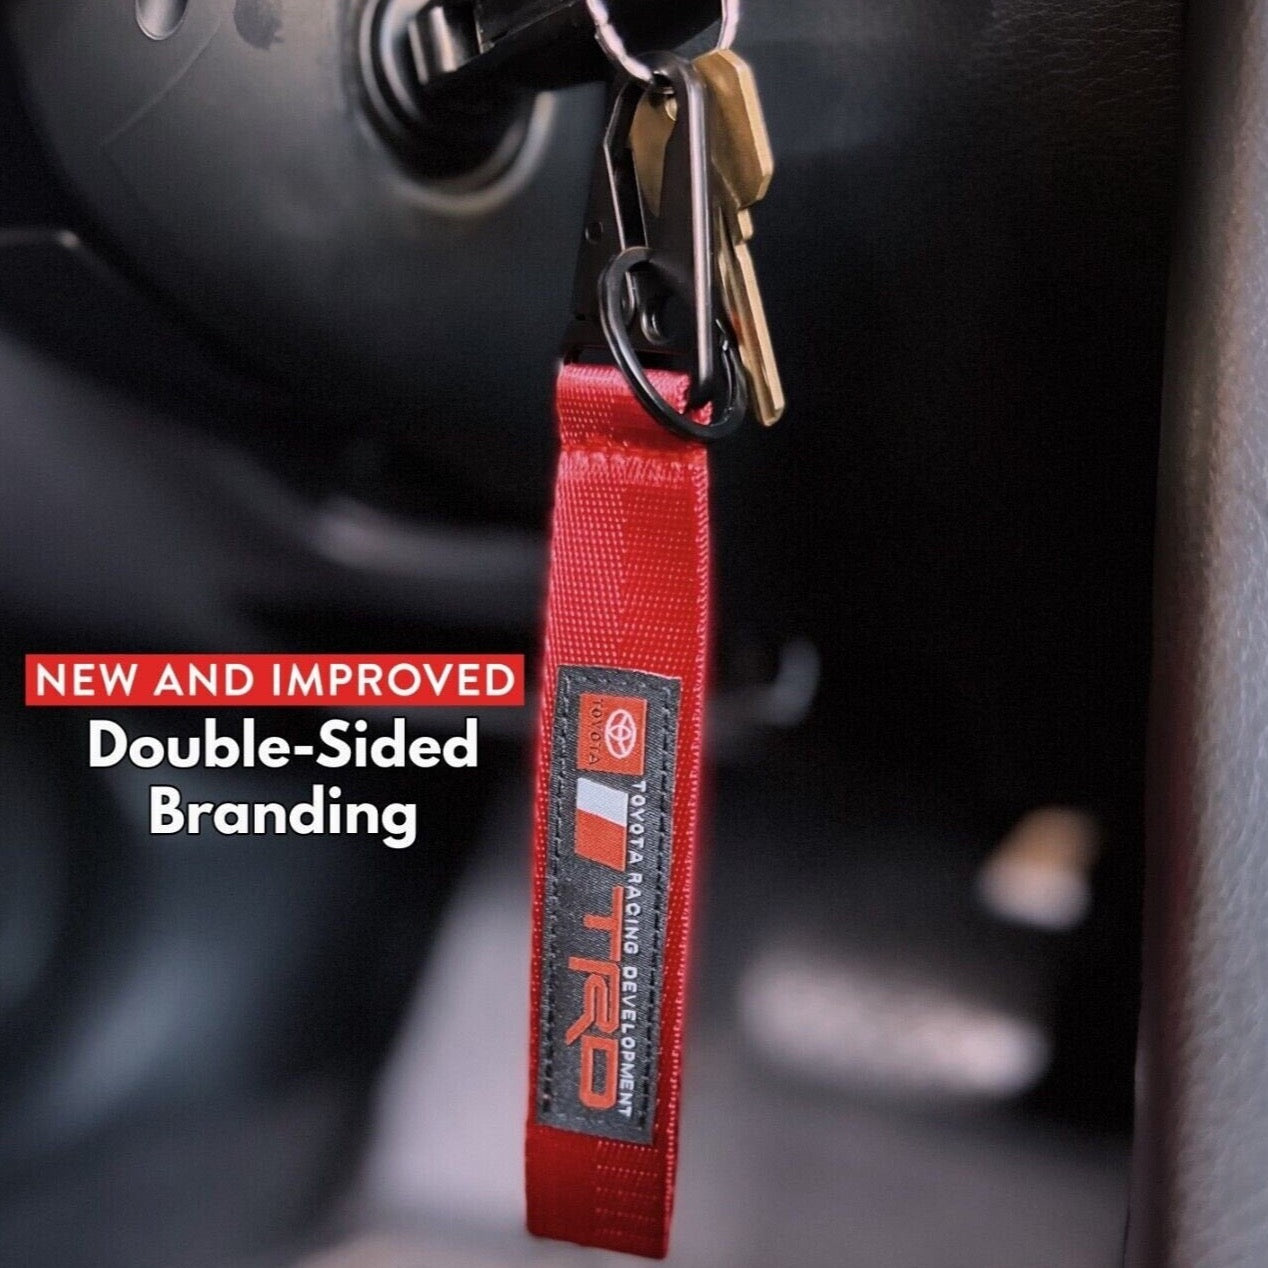 TRD Red Toyota Keychain Wristlet Lanyard (Double-Sided) Metal Clip-On Accessory